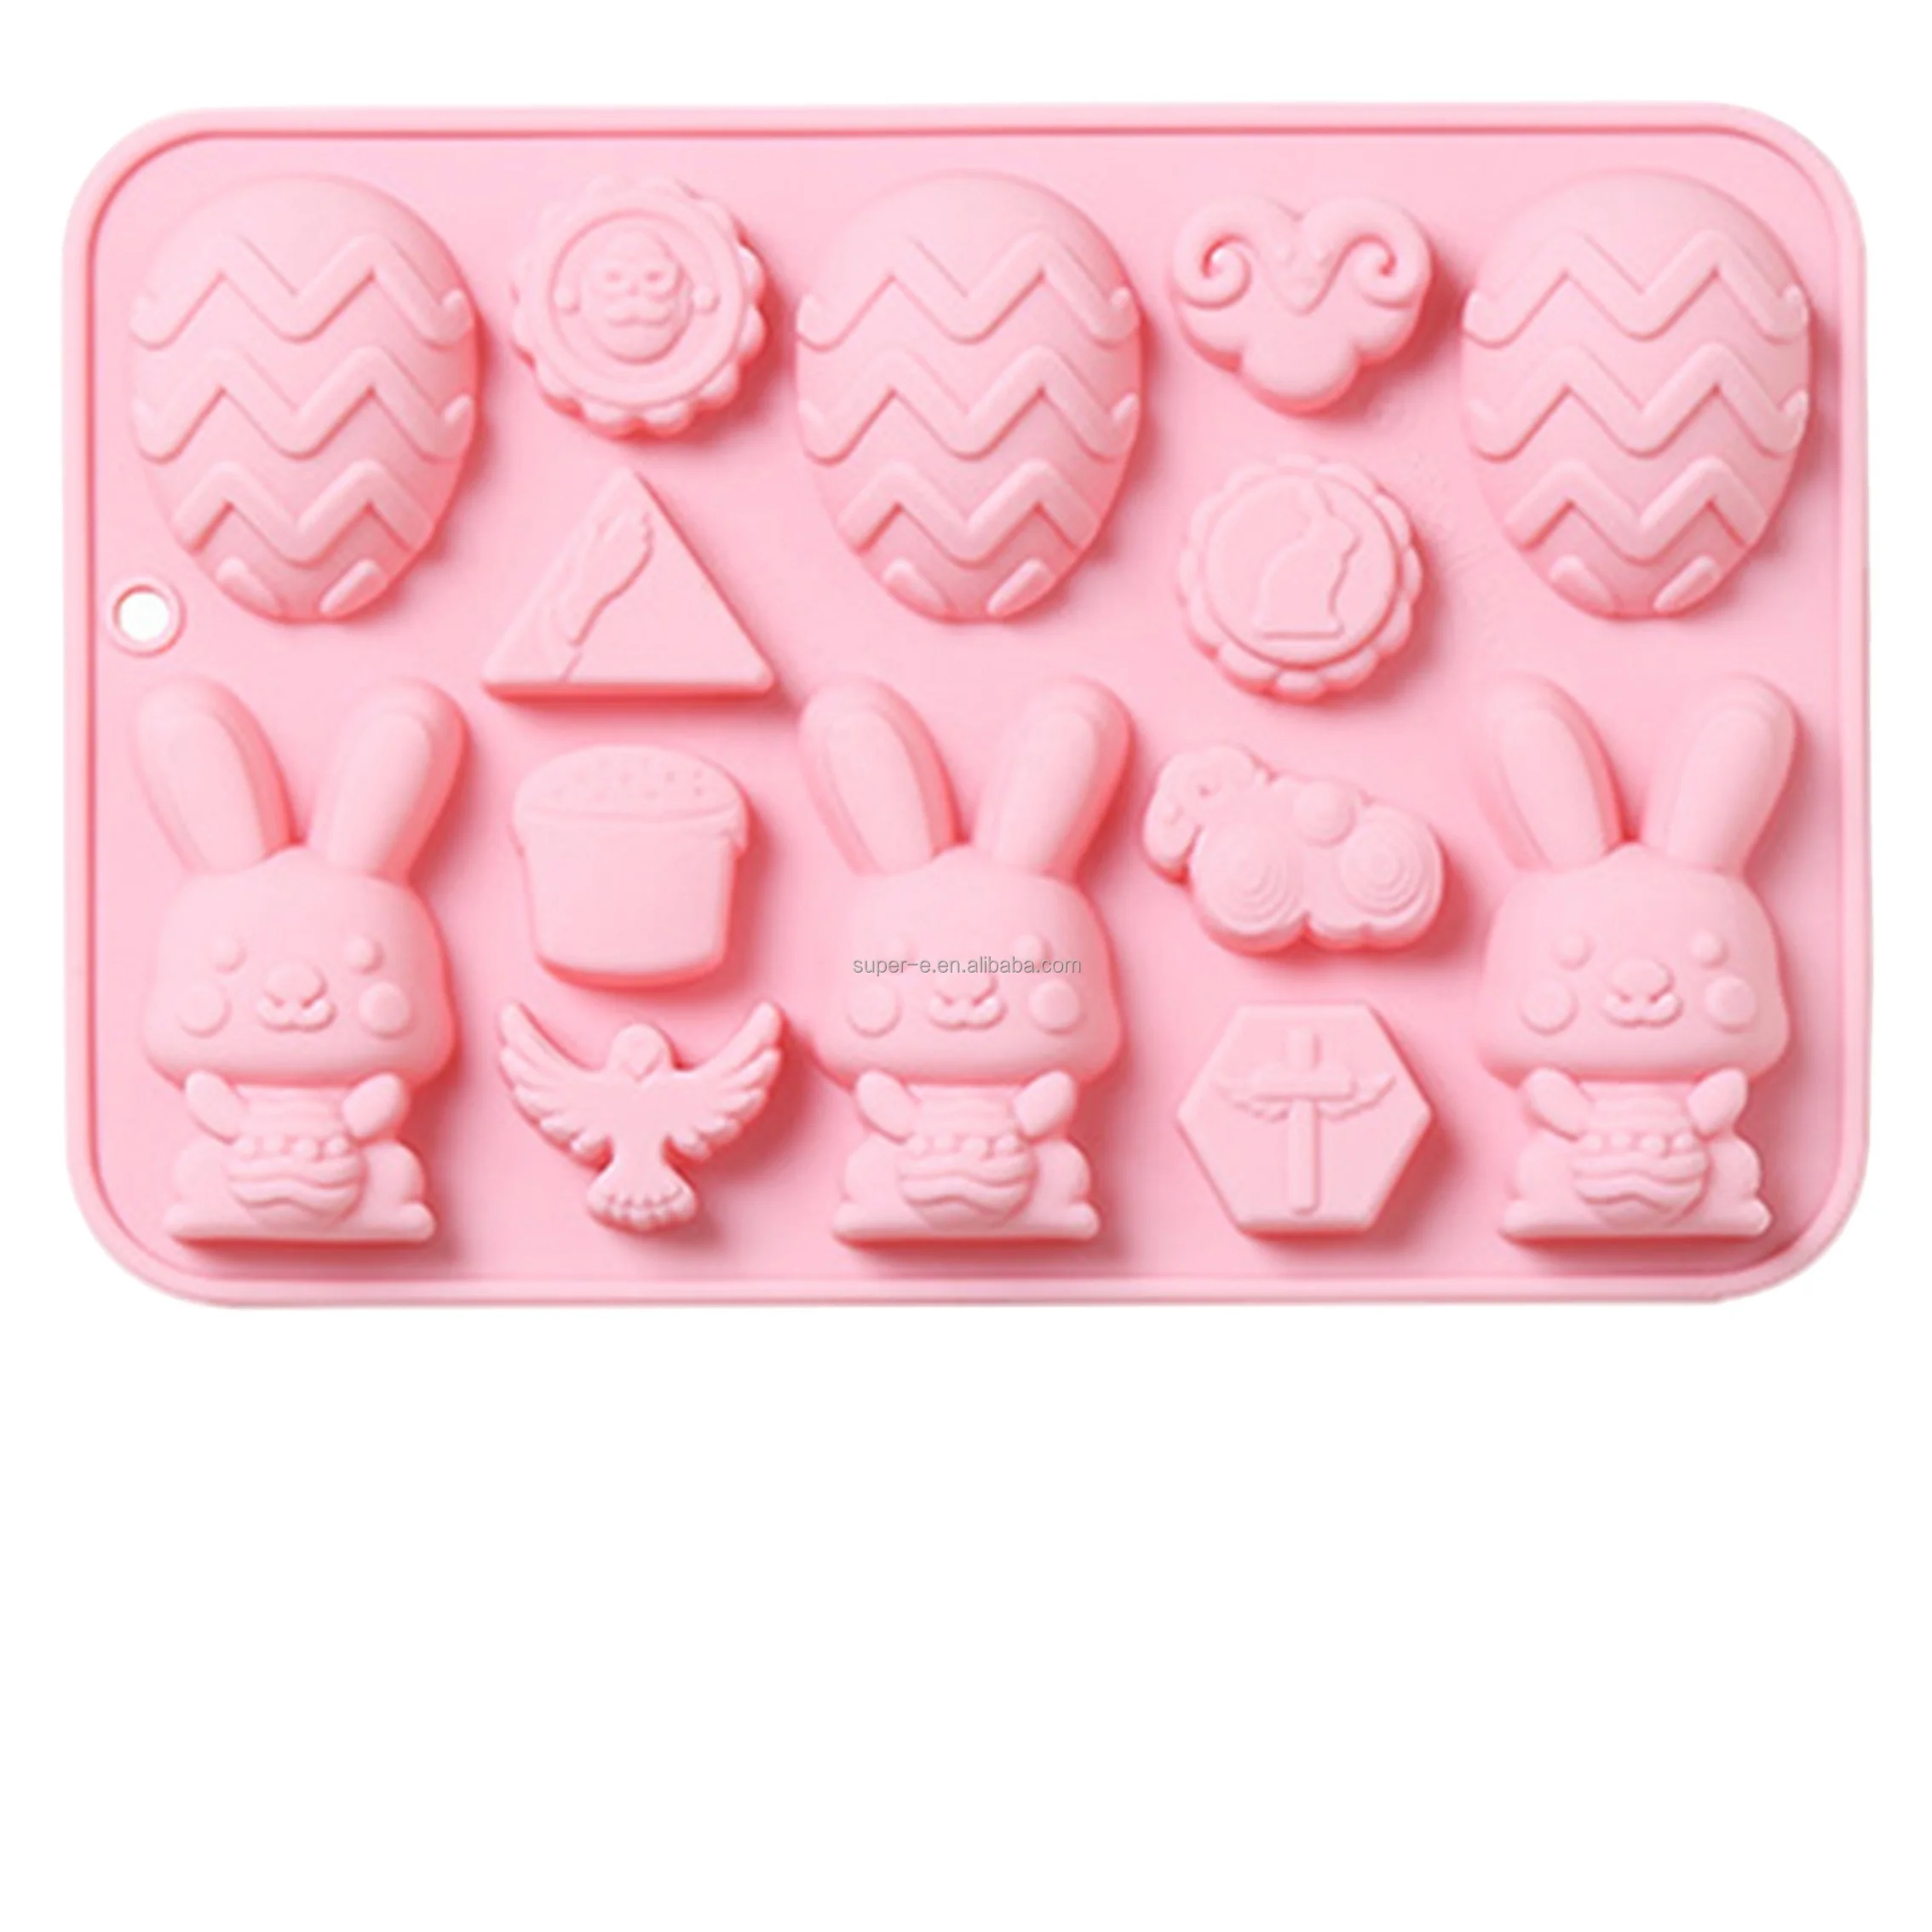 Hot Selling Easter Rabbit Egg Shaped Silicone Cake Mold Soap Mold Chocolate Molds Cake Tools kitchen tools